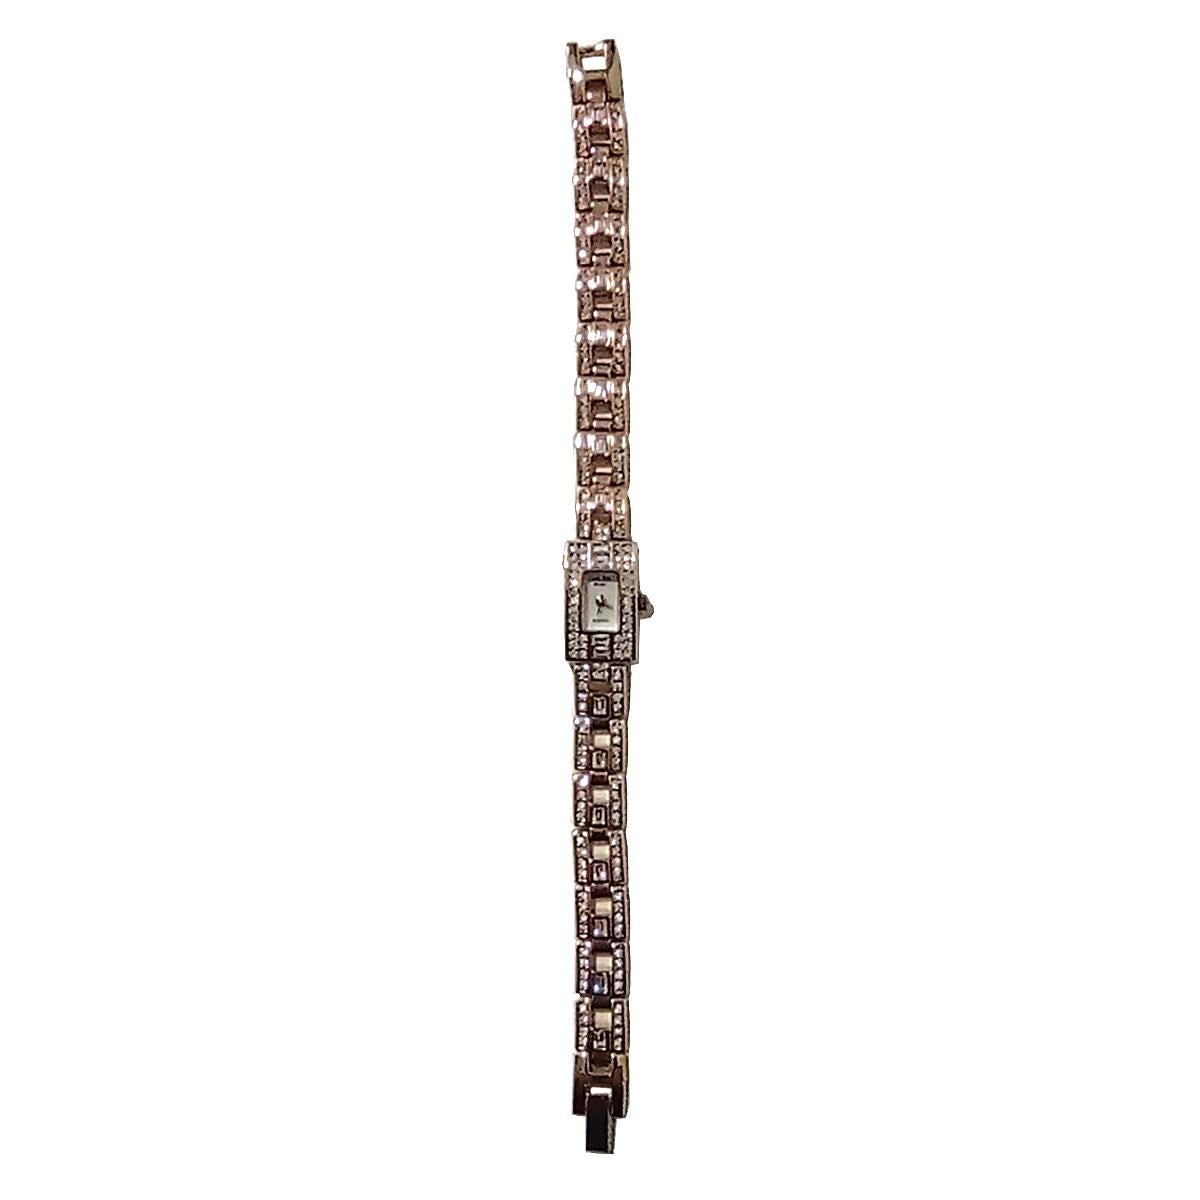 Amazing Carlo Zini Milano jewel watch 
One of the greatest bijoux creators of all times
Vintage from late 80's / early 90's
Perfectly working
Japanese quartz movement
Golden metal strap, 18kt 3 micron gold dipped
Swarovski crystals
Non